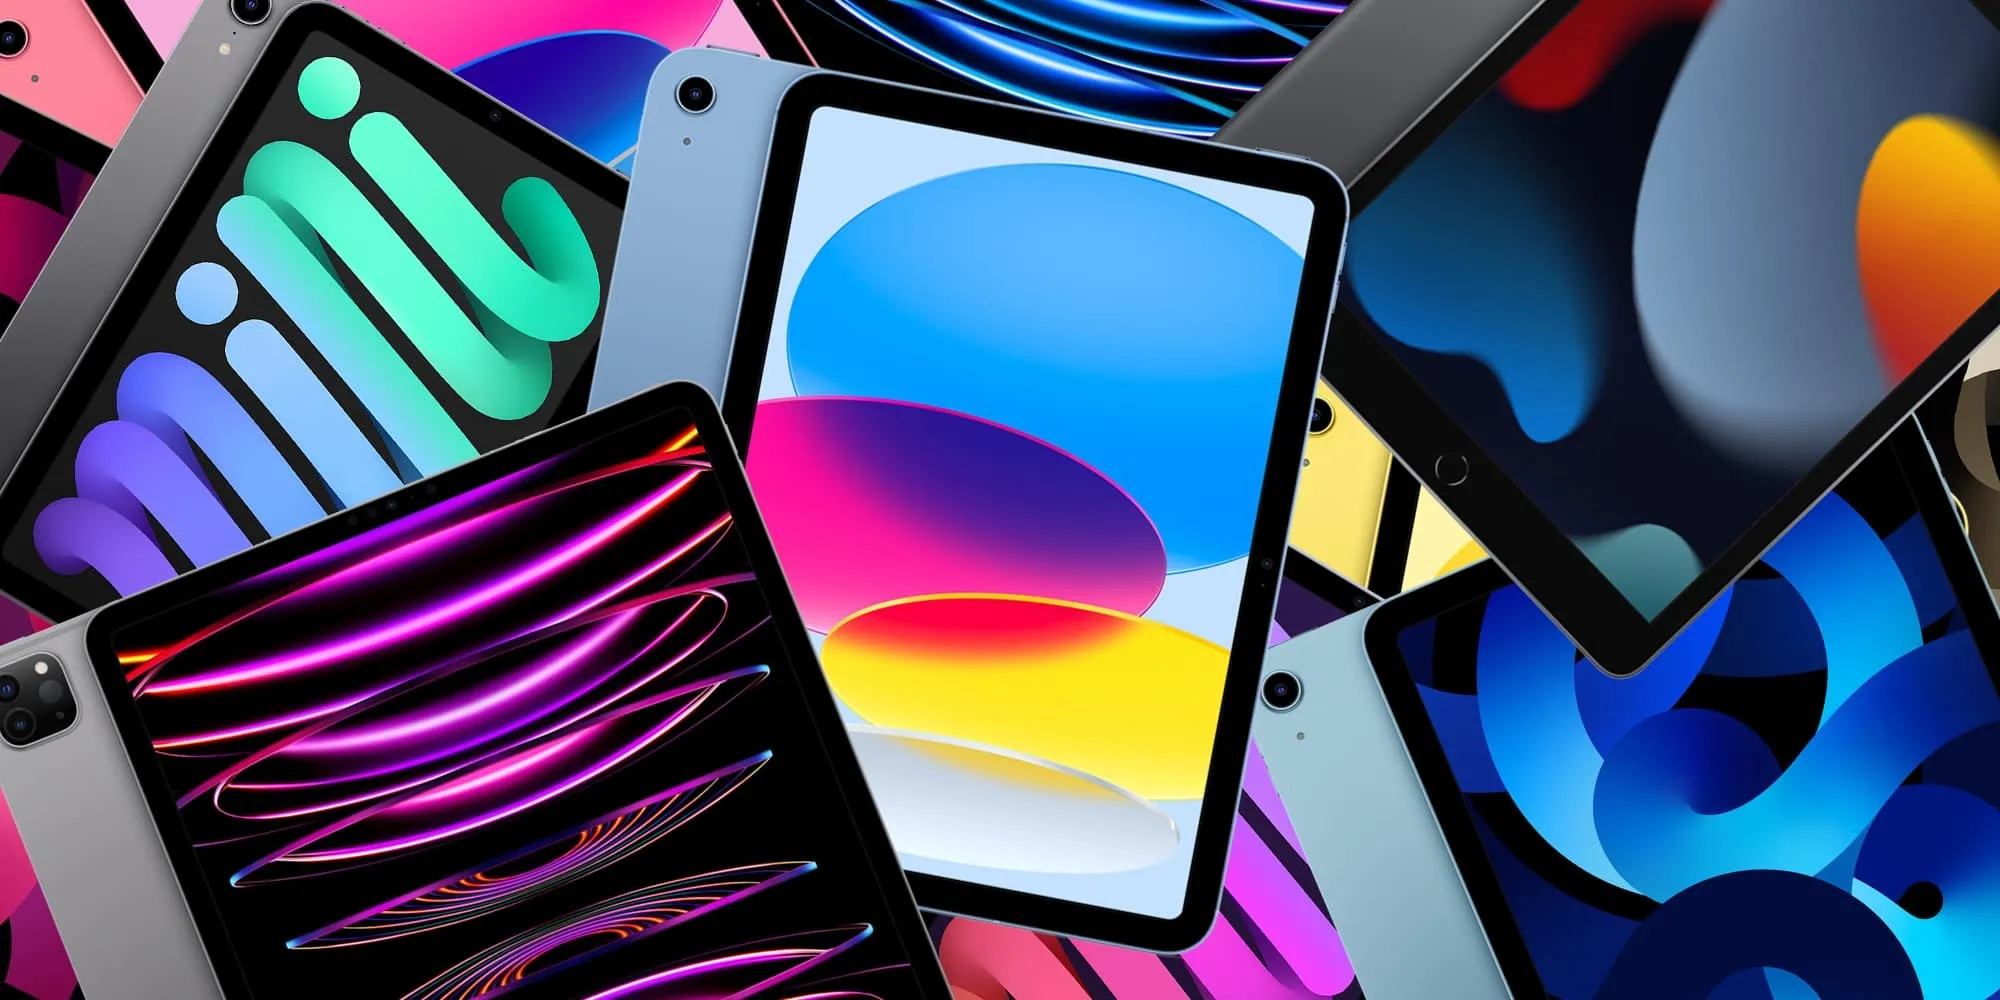 The iPad lineup: Does it provide something for everyone, or is it a jumbled mess?